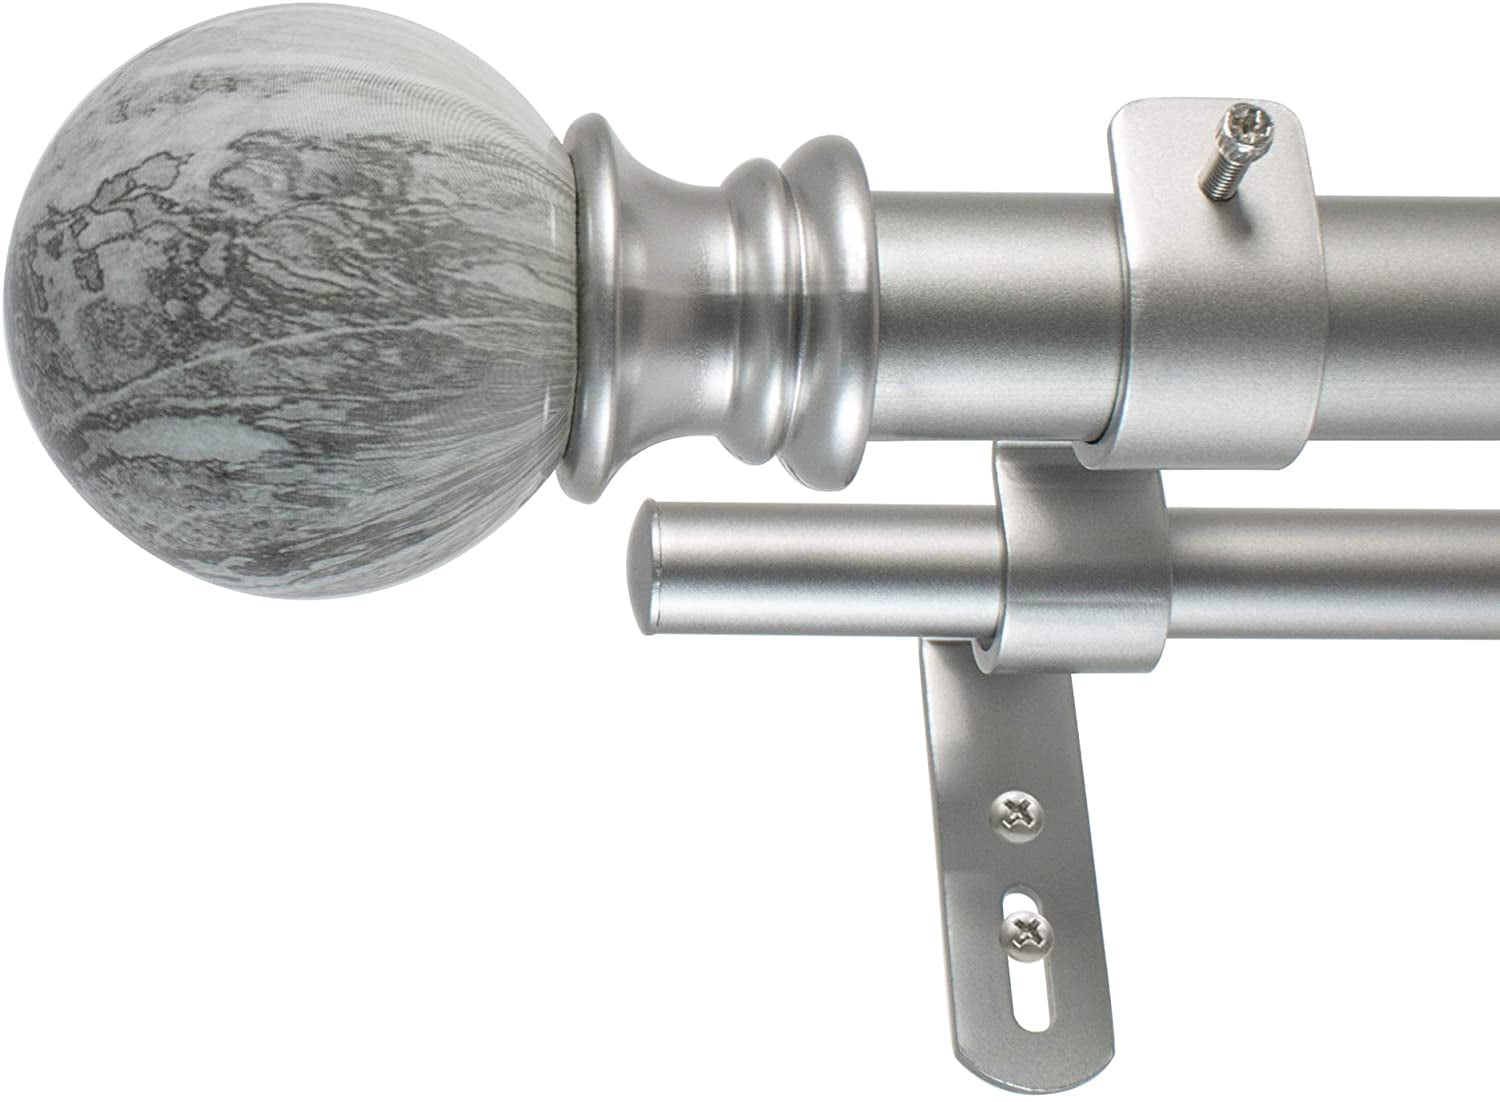 Details about   Decopolitan 30023-AS36 MARBLE BALL DOUBLE CURTAIN ROD SET 36 to 72-Inches, 